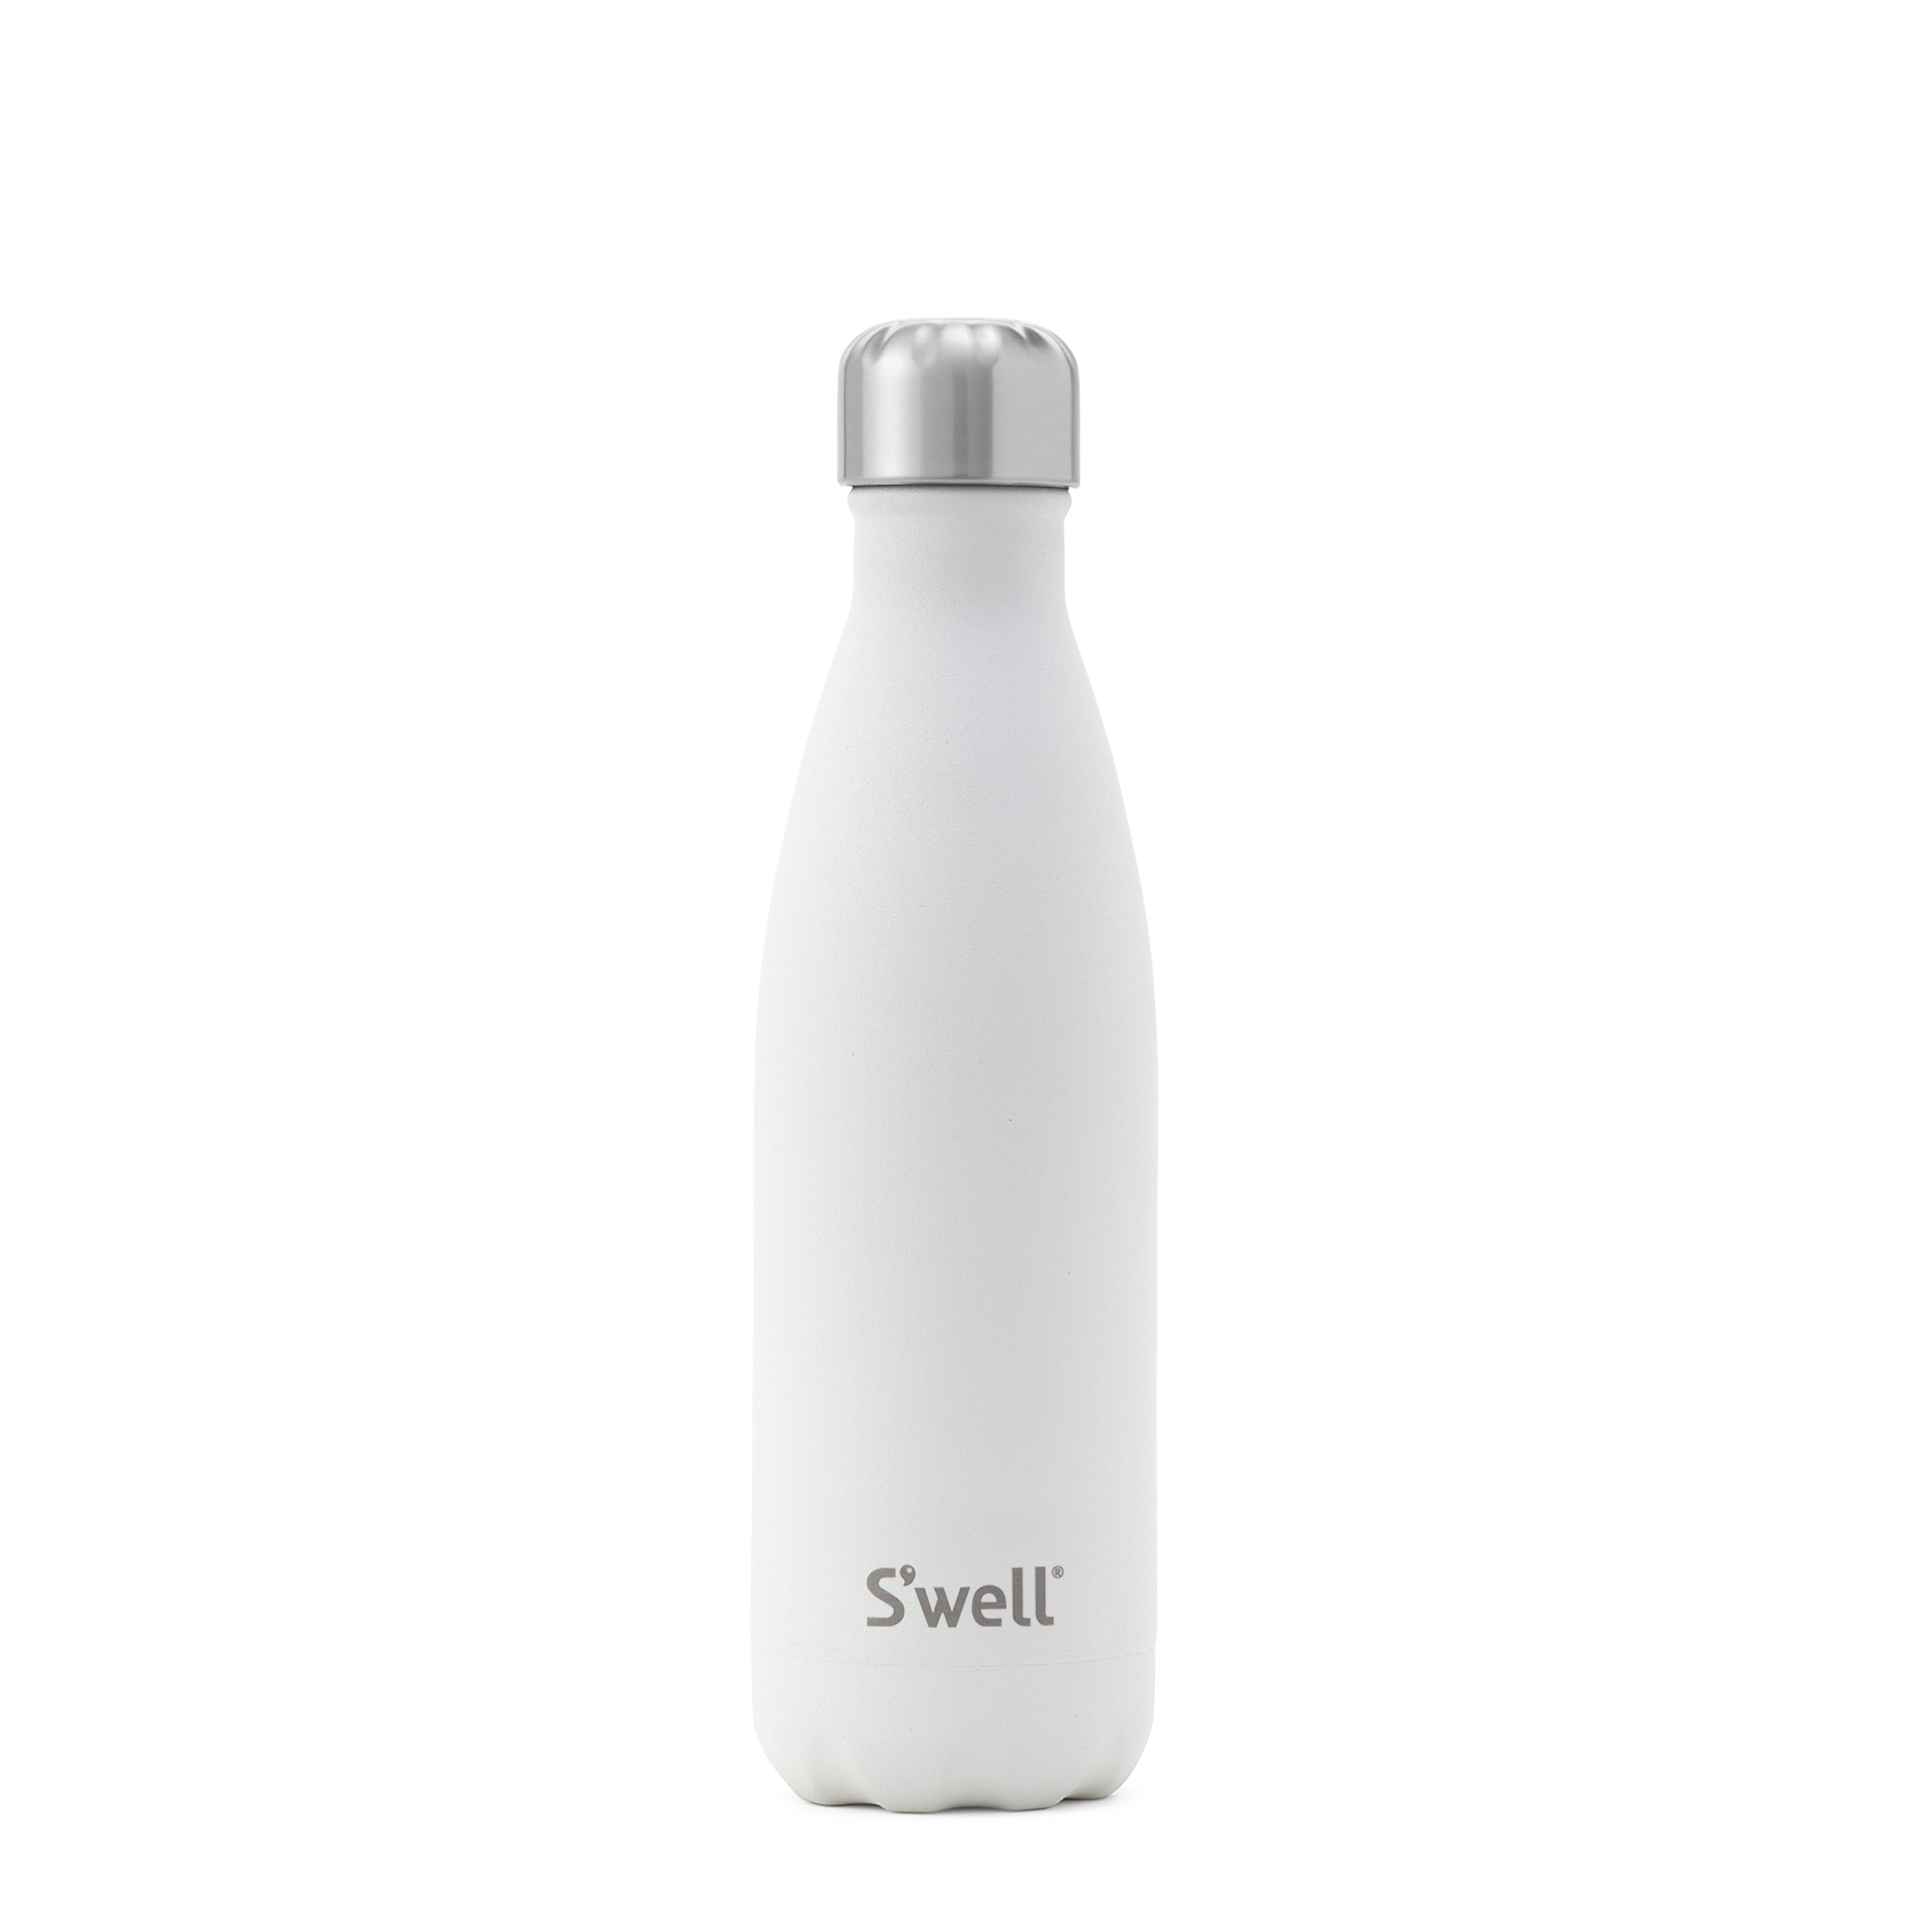 Swell Vacuum Insulated Stainless Steel Water Bottle 17 oz starboard lot of 4 